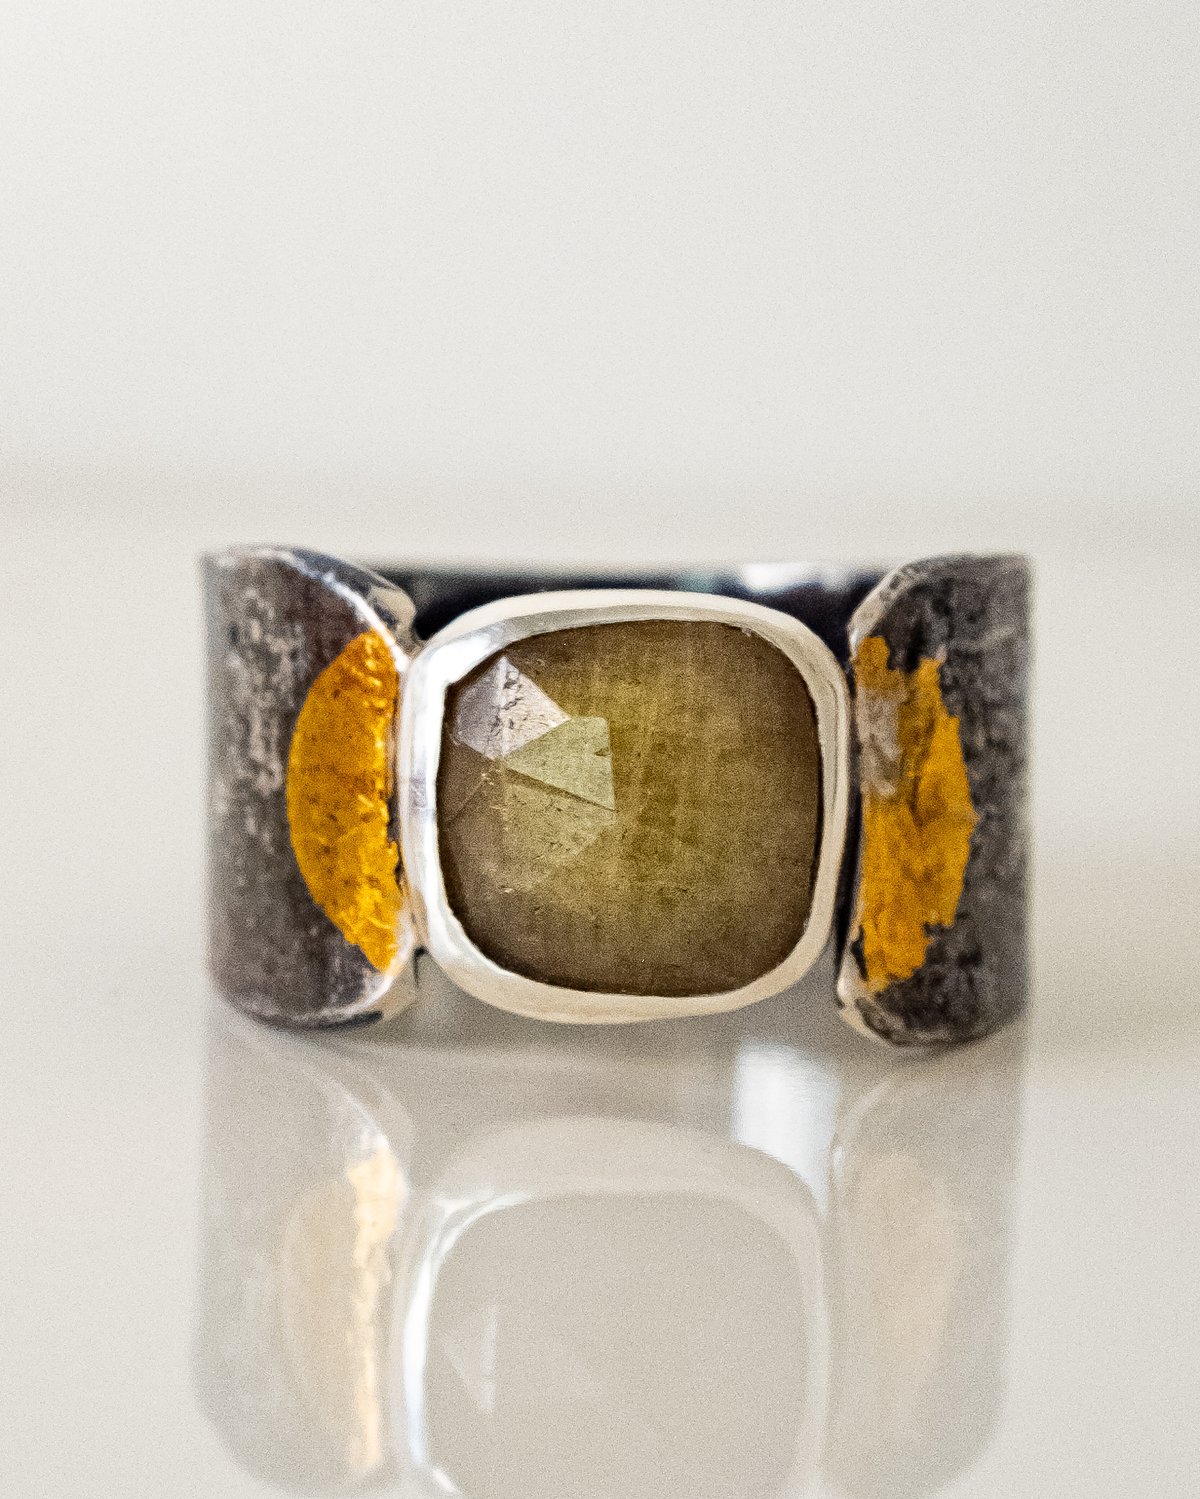 Image of 5.75 - Reticulated Silver, Sapphire and 24kt Keum Boo Ring